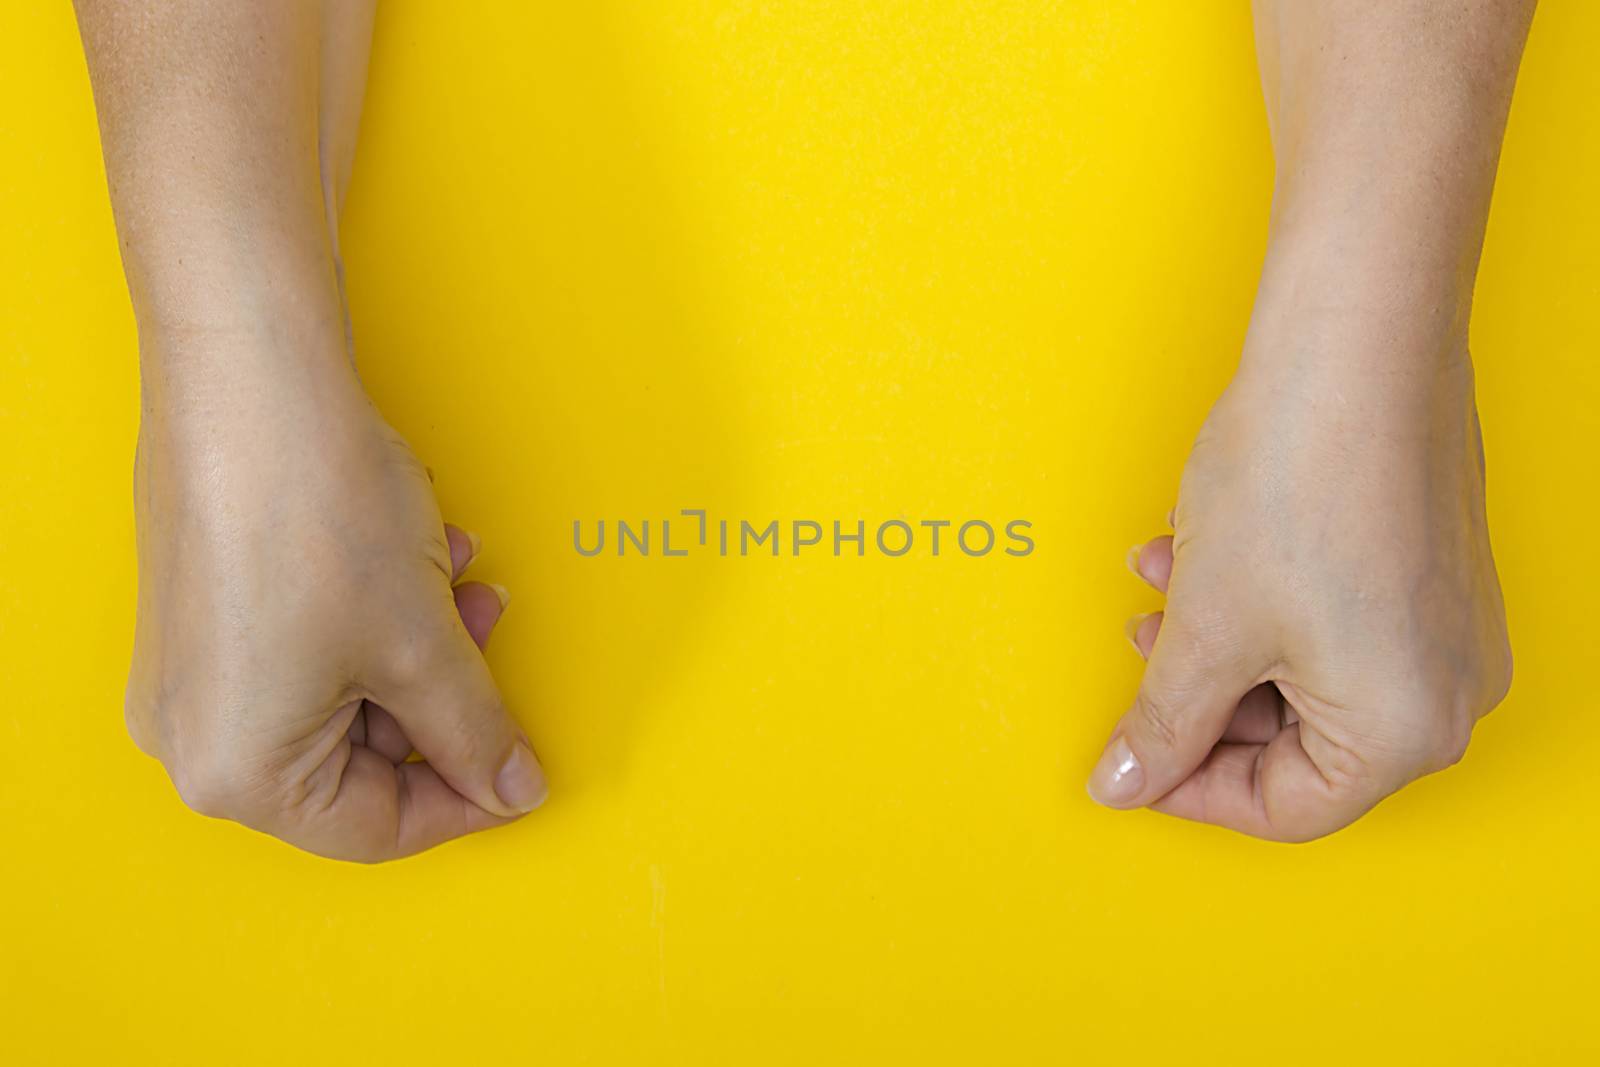 Hands with clenched fingers in a pinch on a yellow background